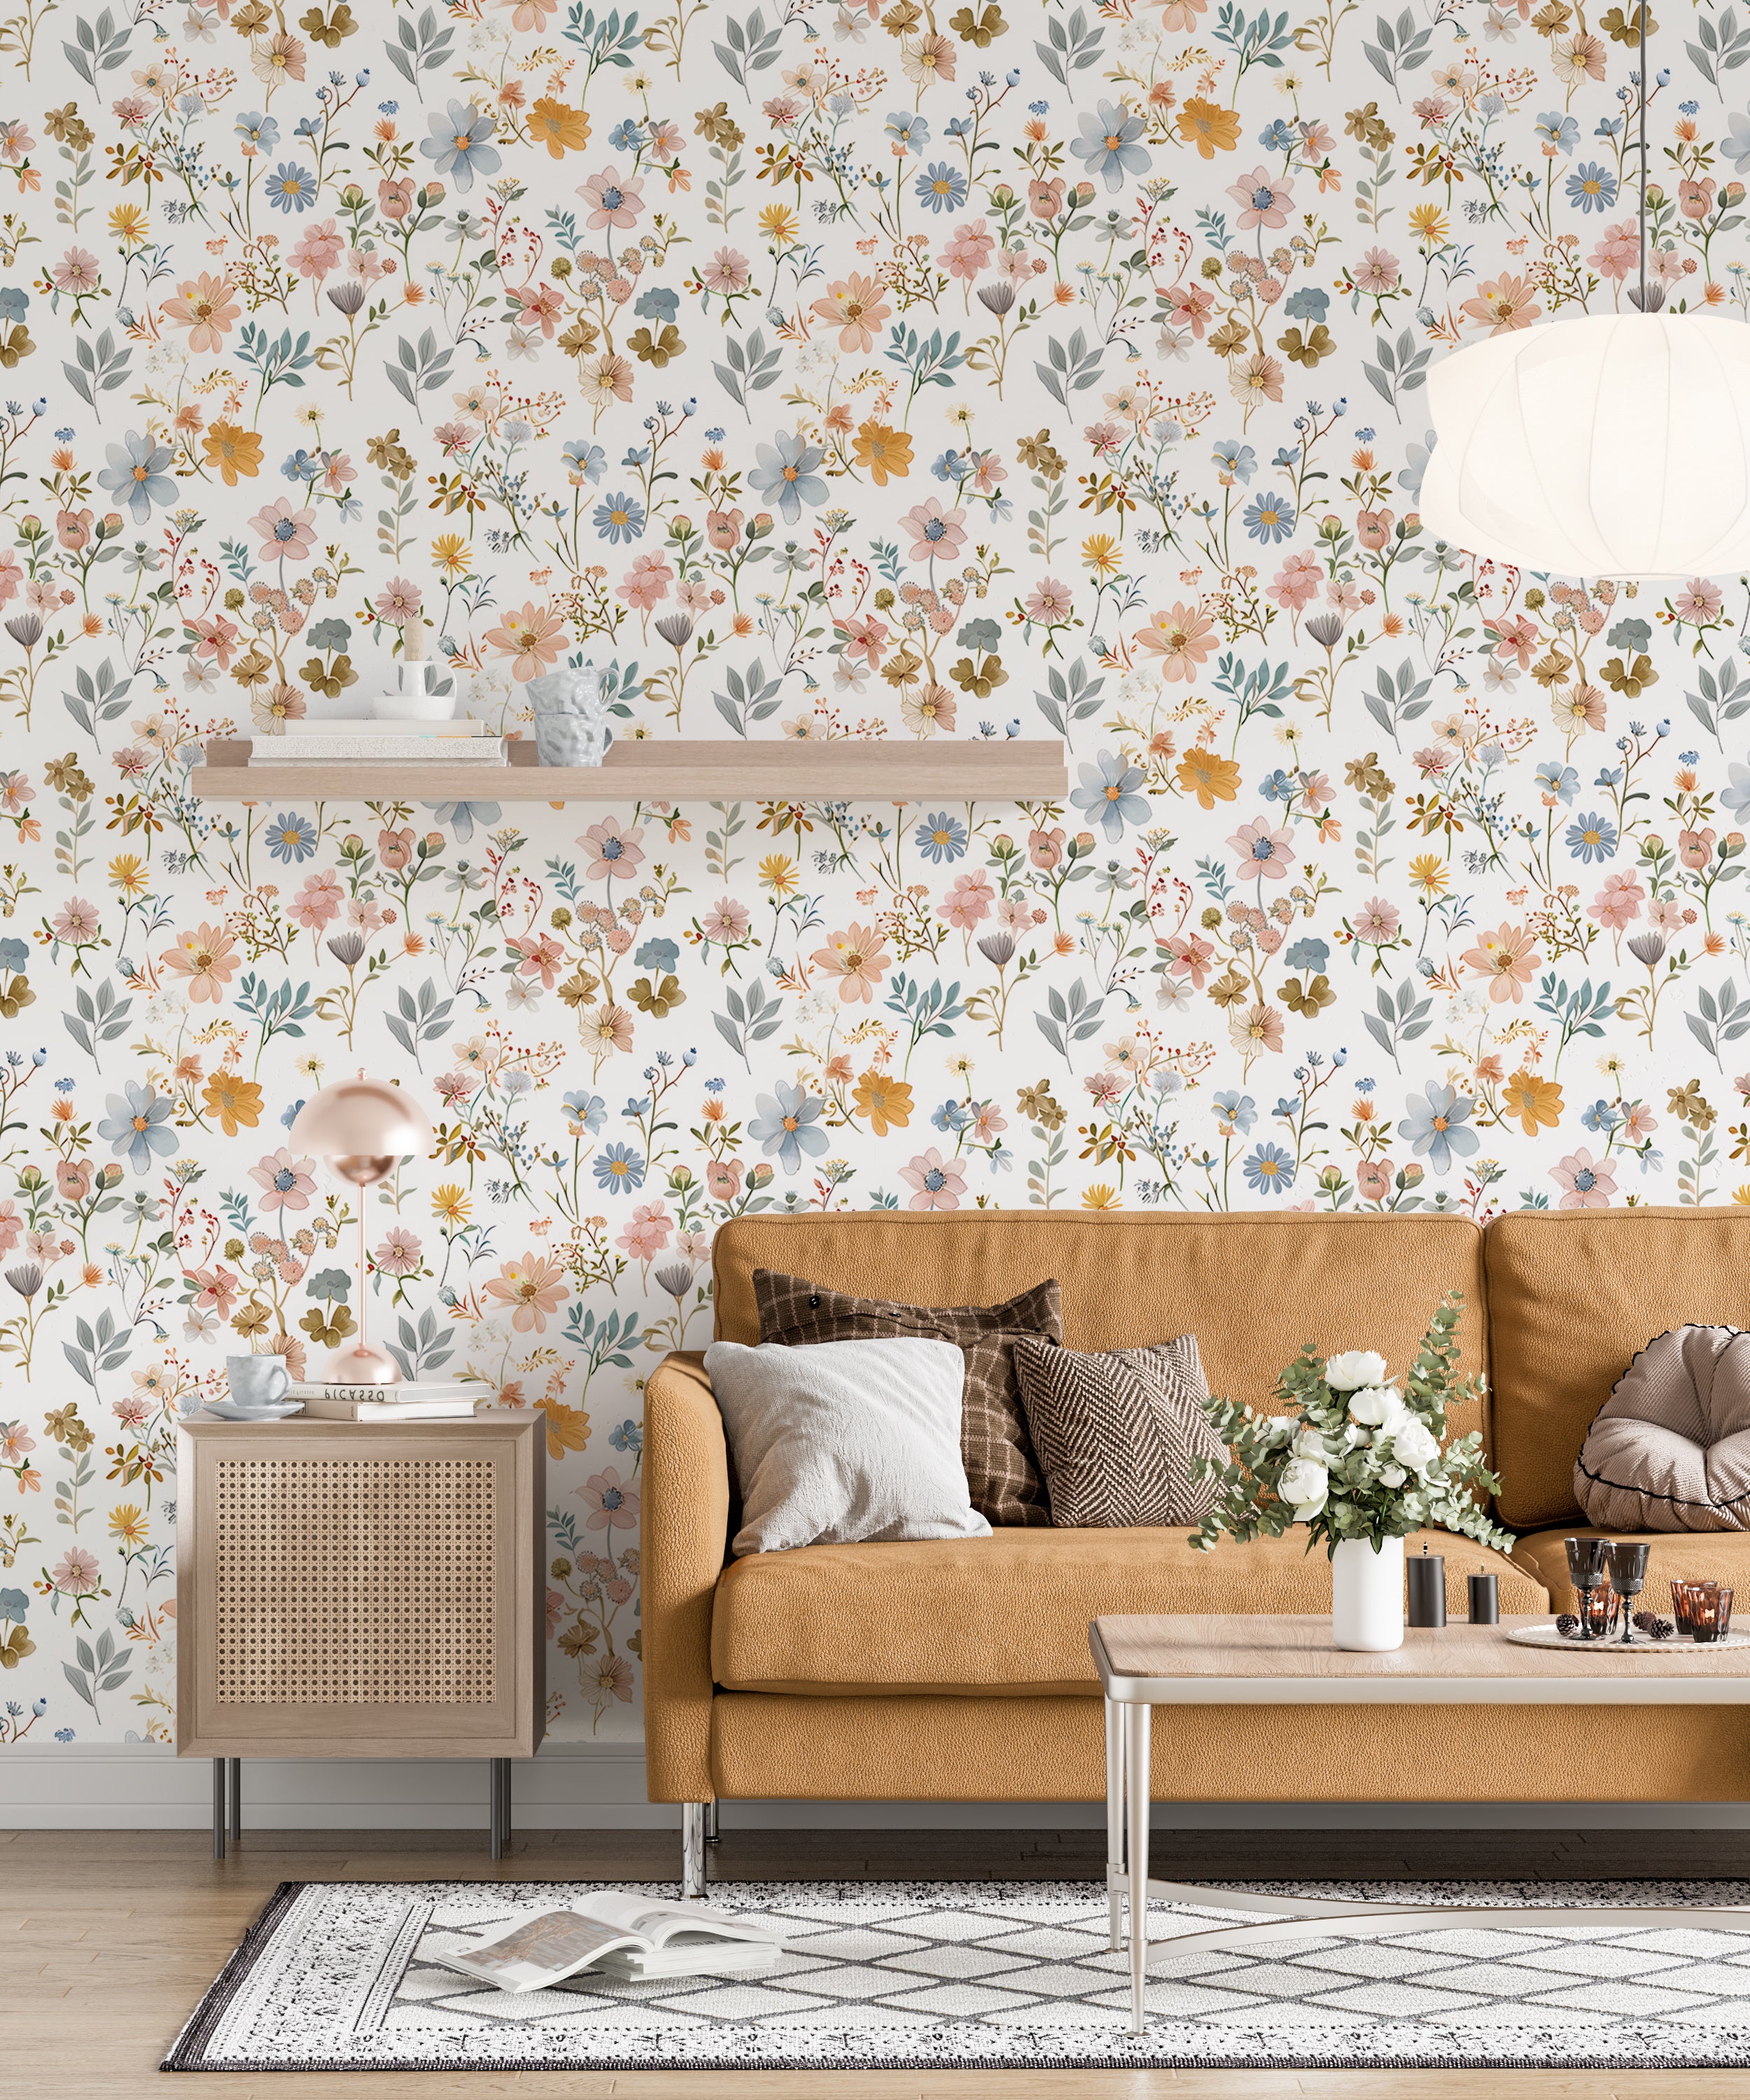 Soft Multi Color Floral Wallpaper, Pastel Meadow Flowers Wall Decal, Peel and Stick Light Botanical Wallpaper, Removable Field Wild Flower Pattern